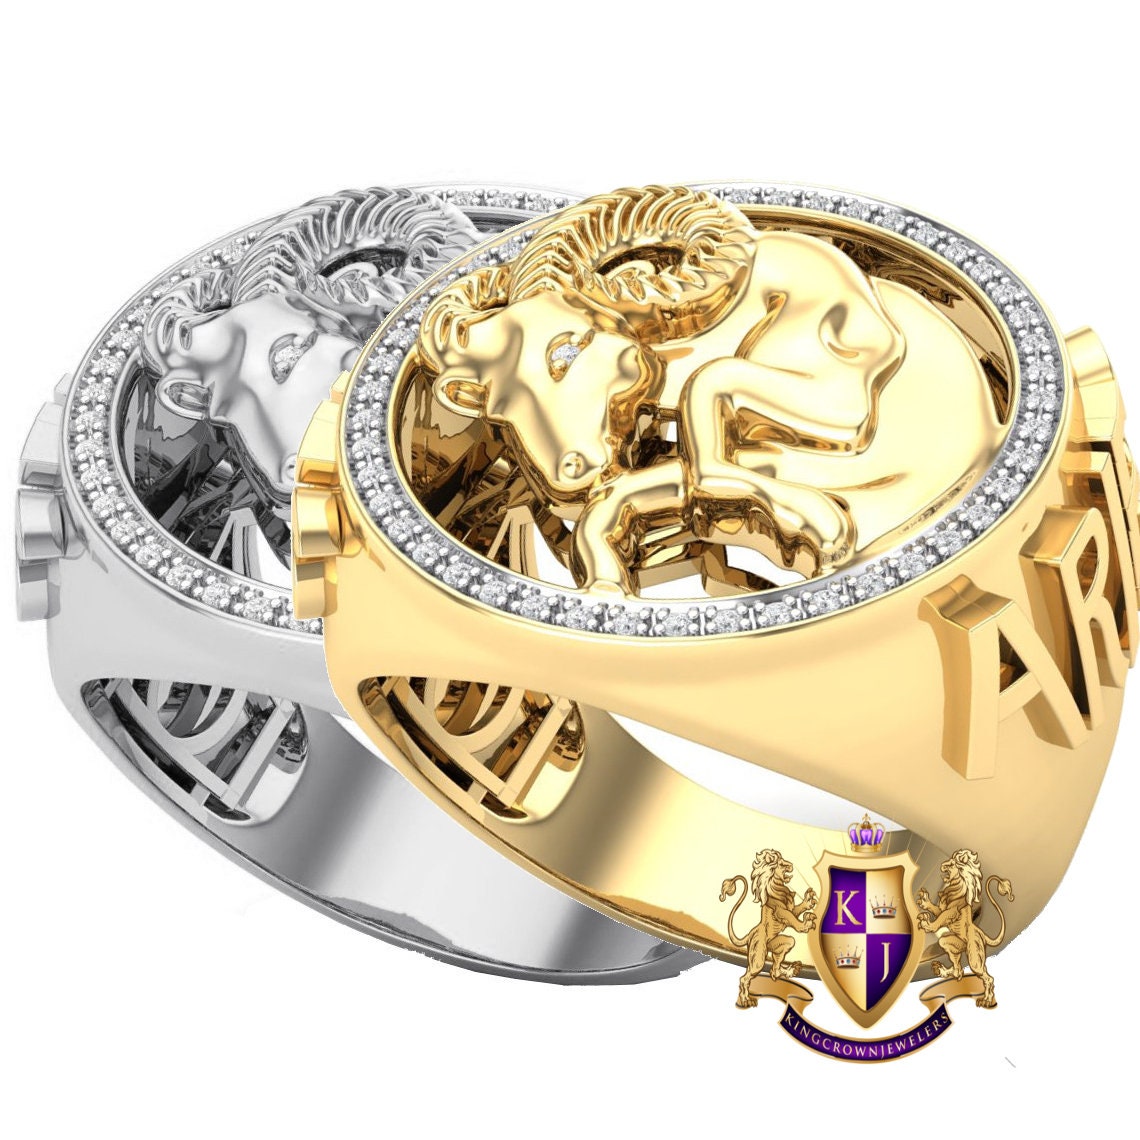 Men's Real Genuine Authentic Diamond Aries Ram Zodiac Lucky Sign Astrology Horoscope 3D Ring Band 10K Gold Finish